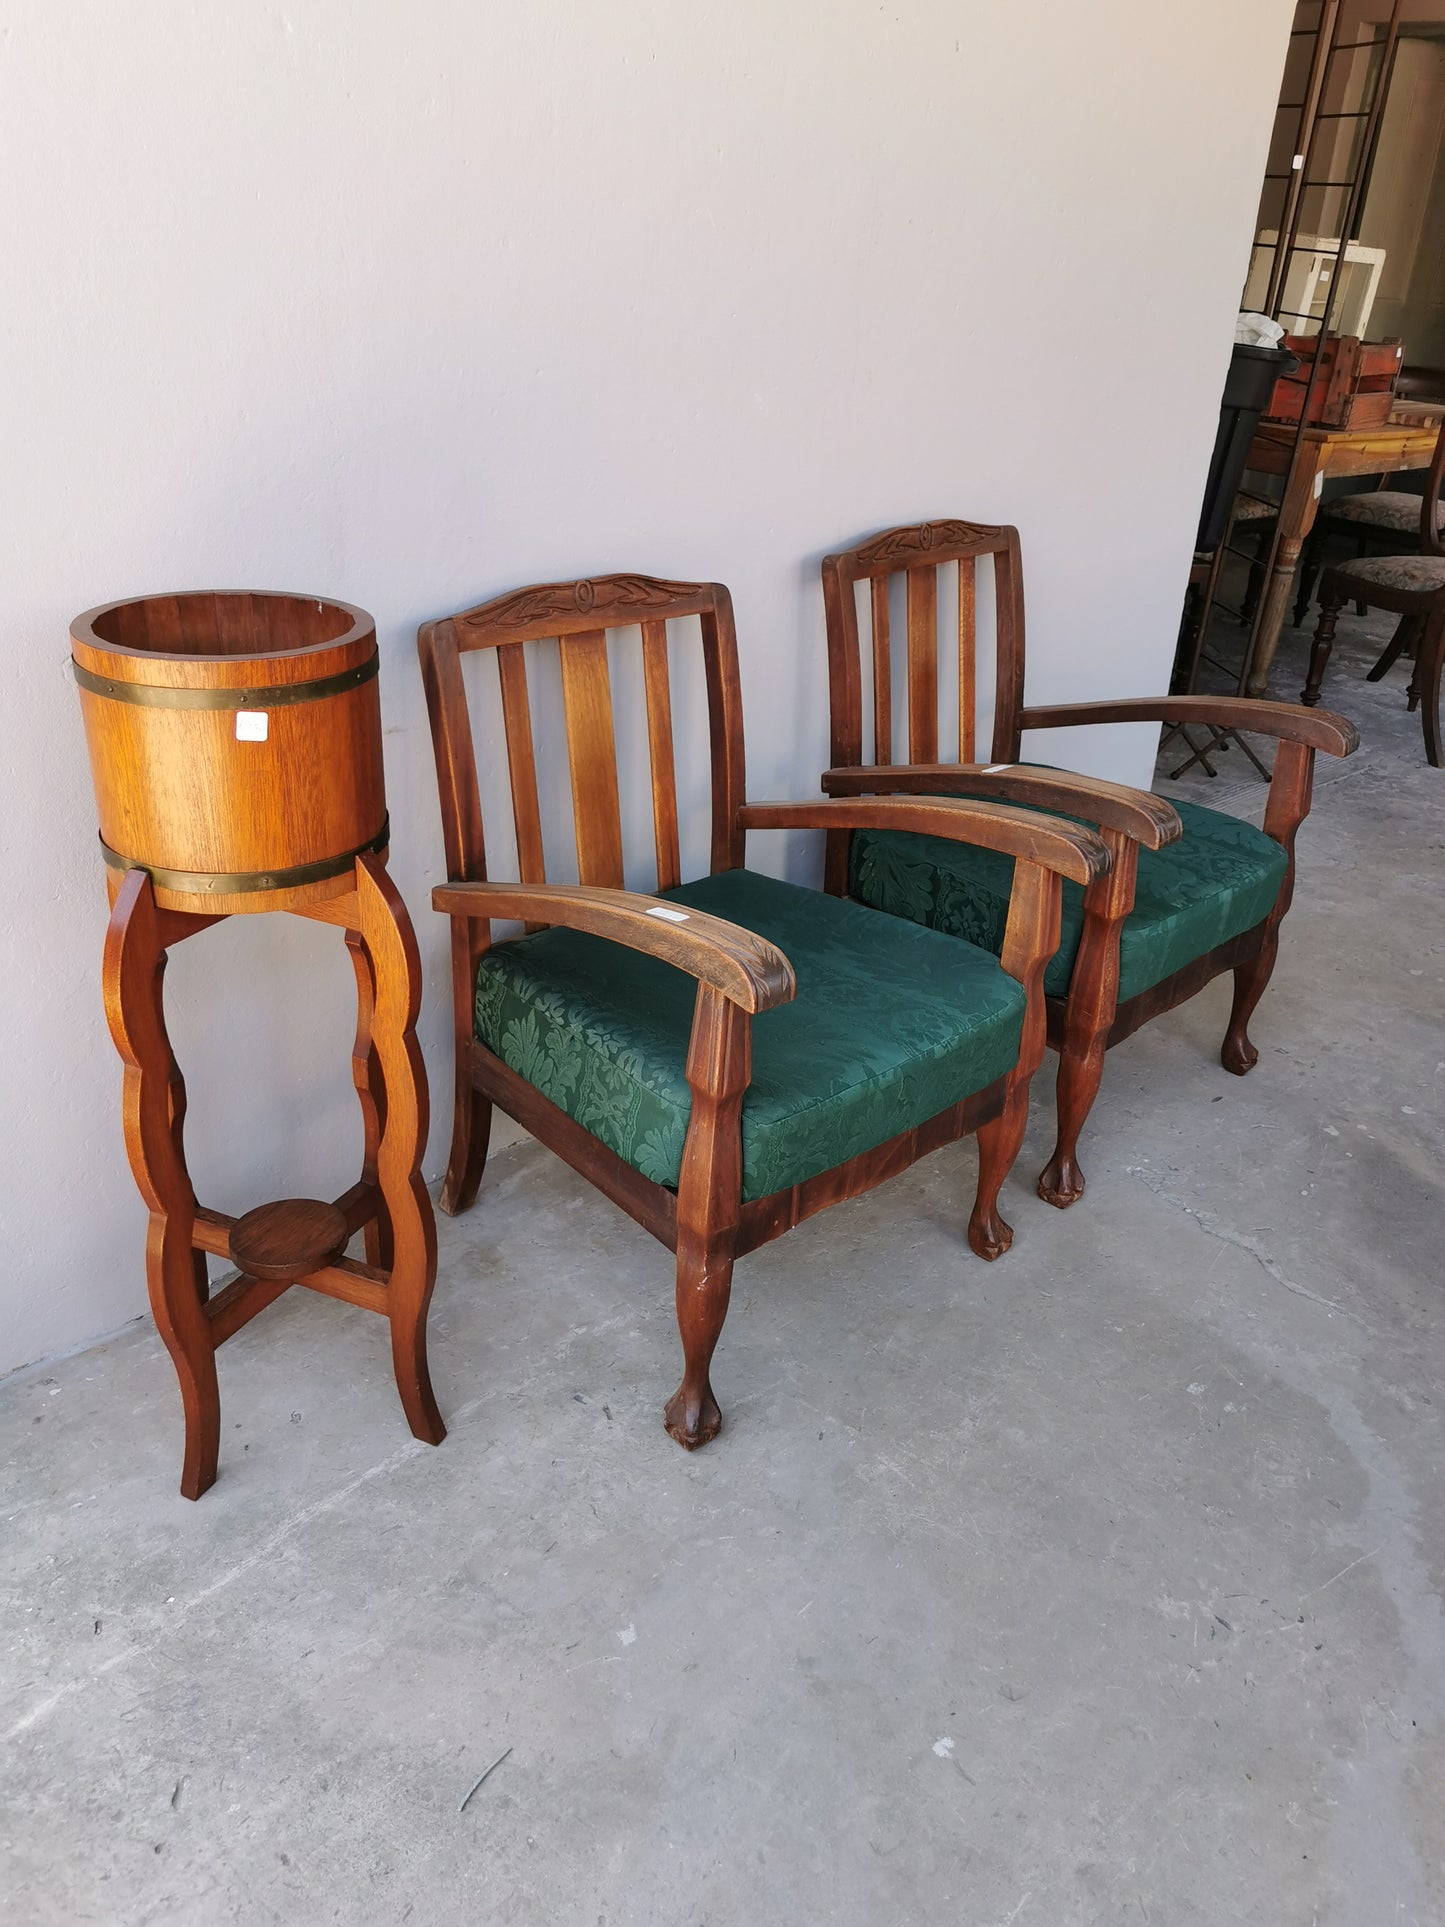 Pair of wooden arm chairs